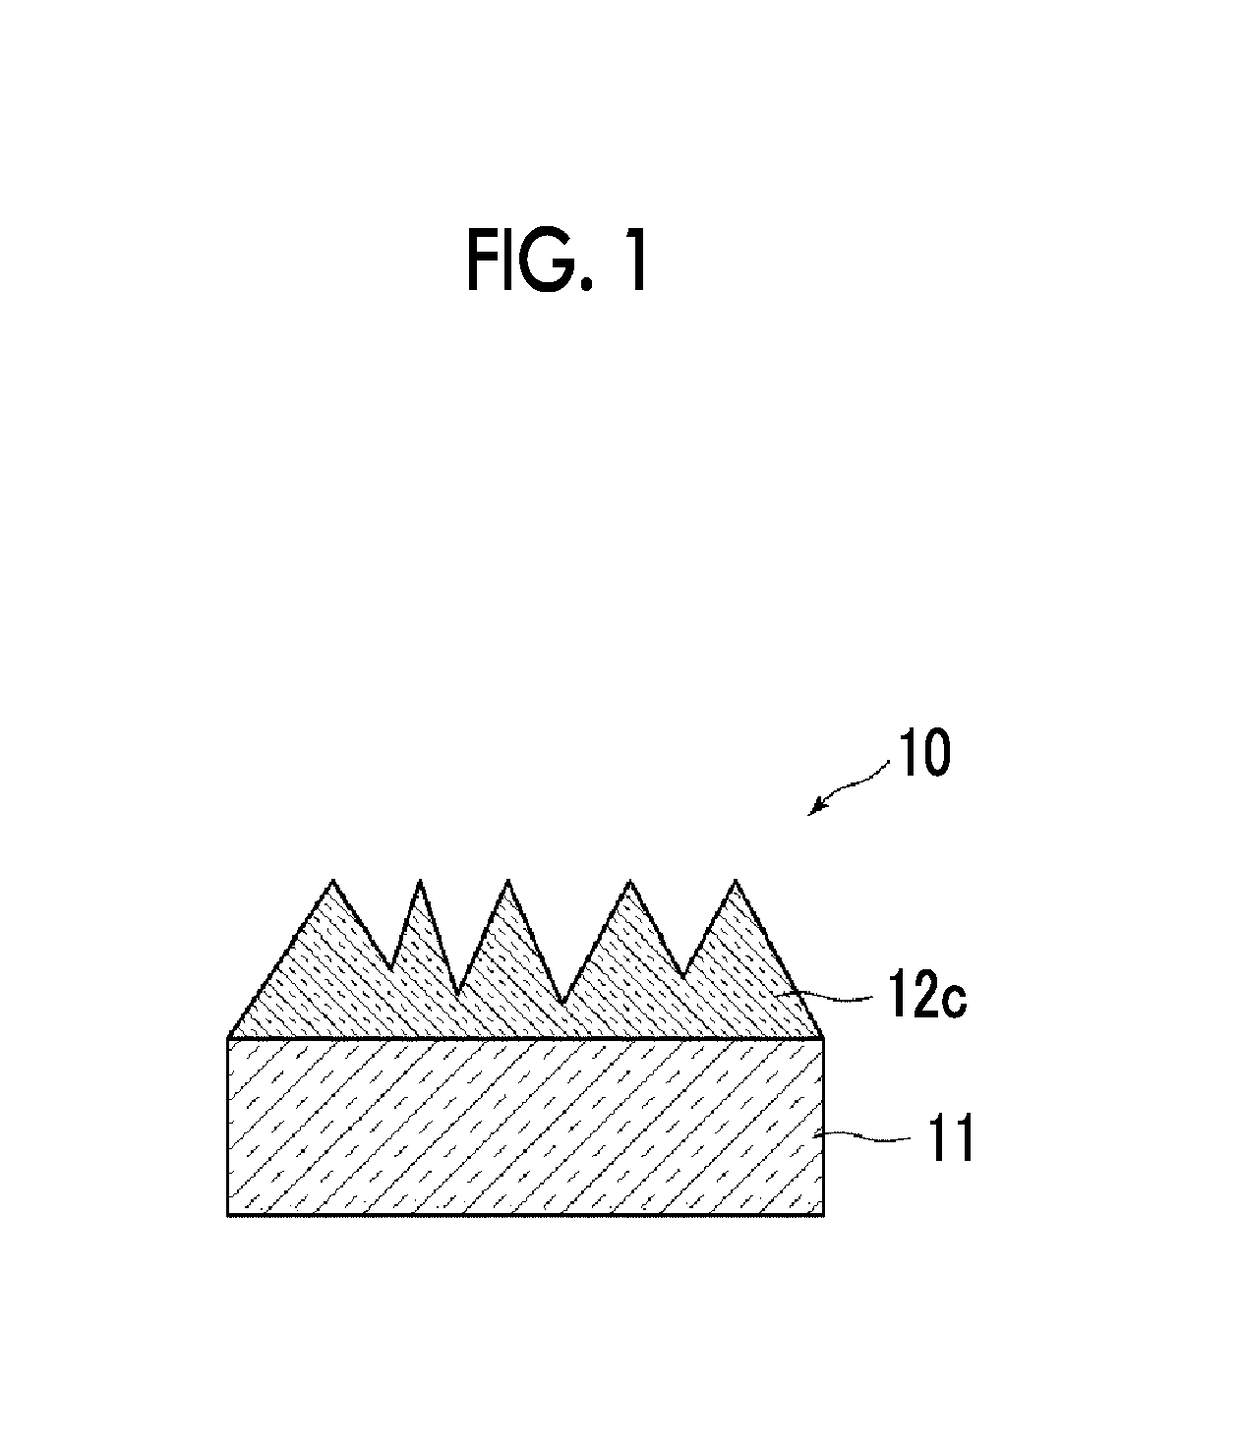 Method of manufacturing structure